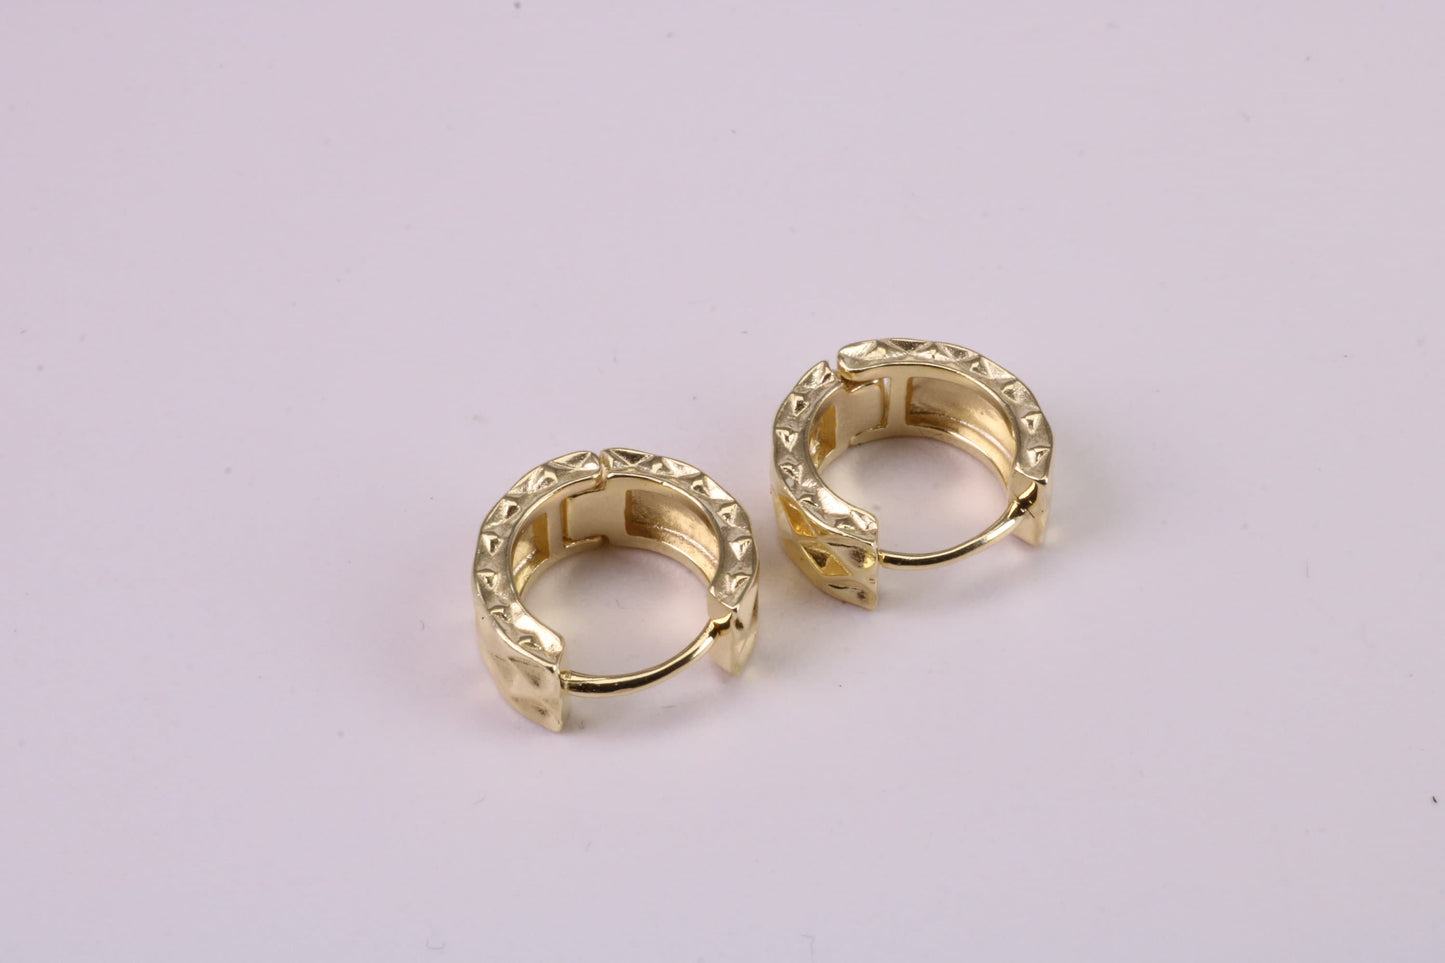 12 mm Round Diamond cut Half Hoop Earrings, Very Dressy, Made from Solid 925 Grade Sterling Silver and 18ct Yellow Gold Plated